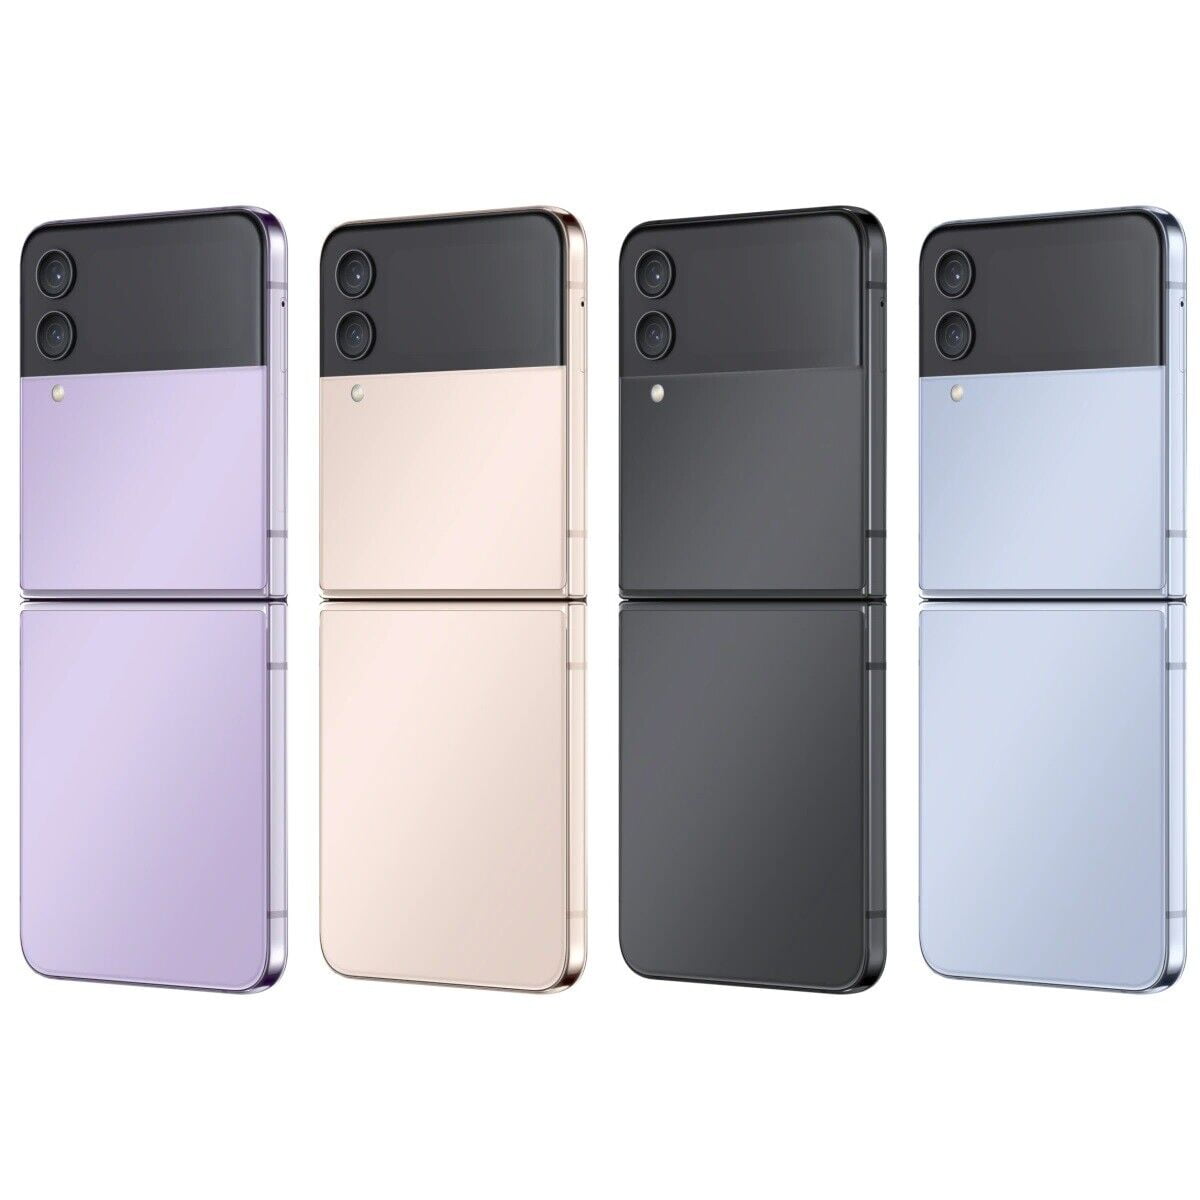 Samsung Galaxy Z Flip 3 Color Options Have Leaked Online